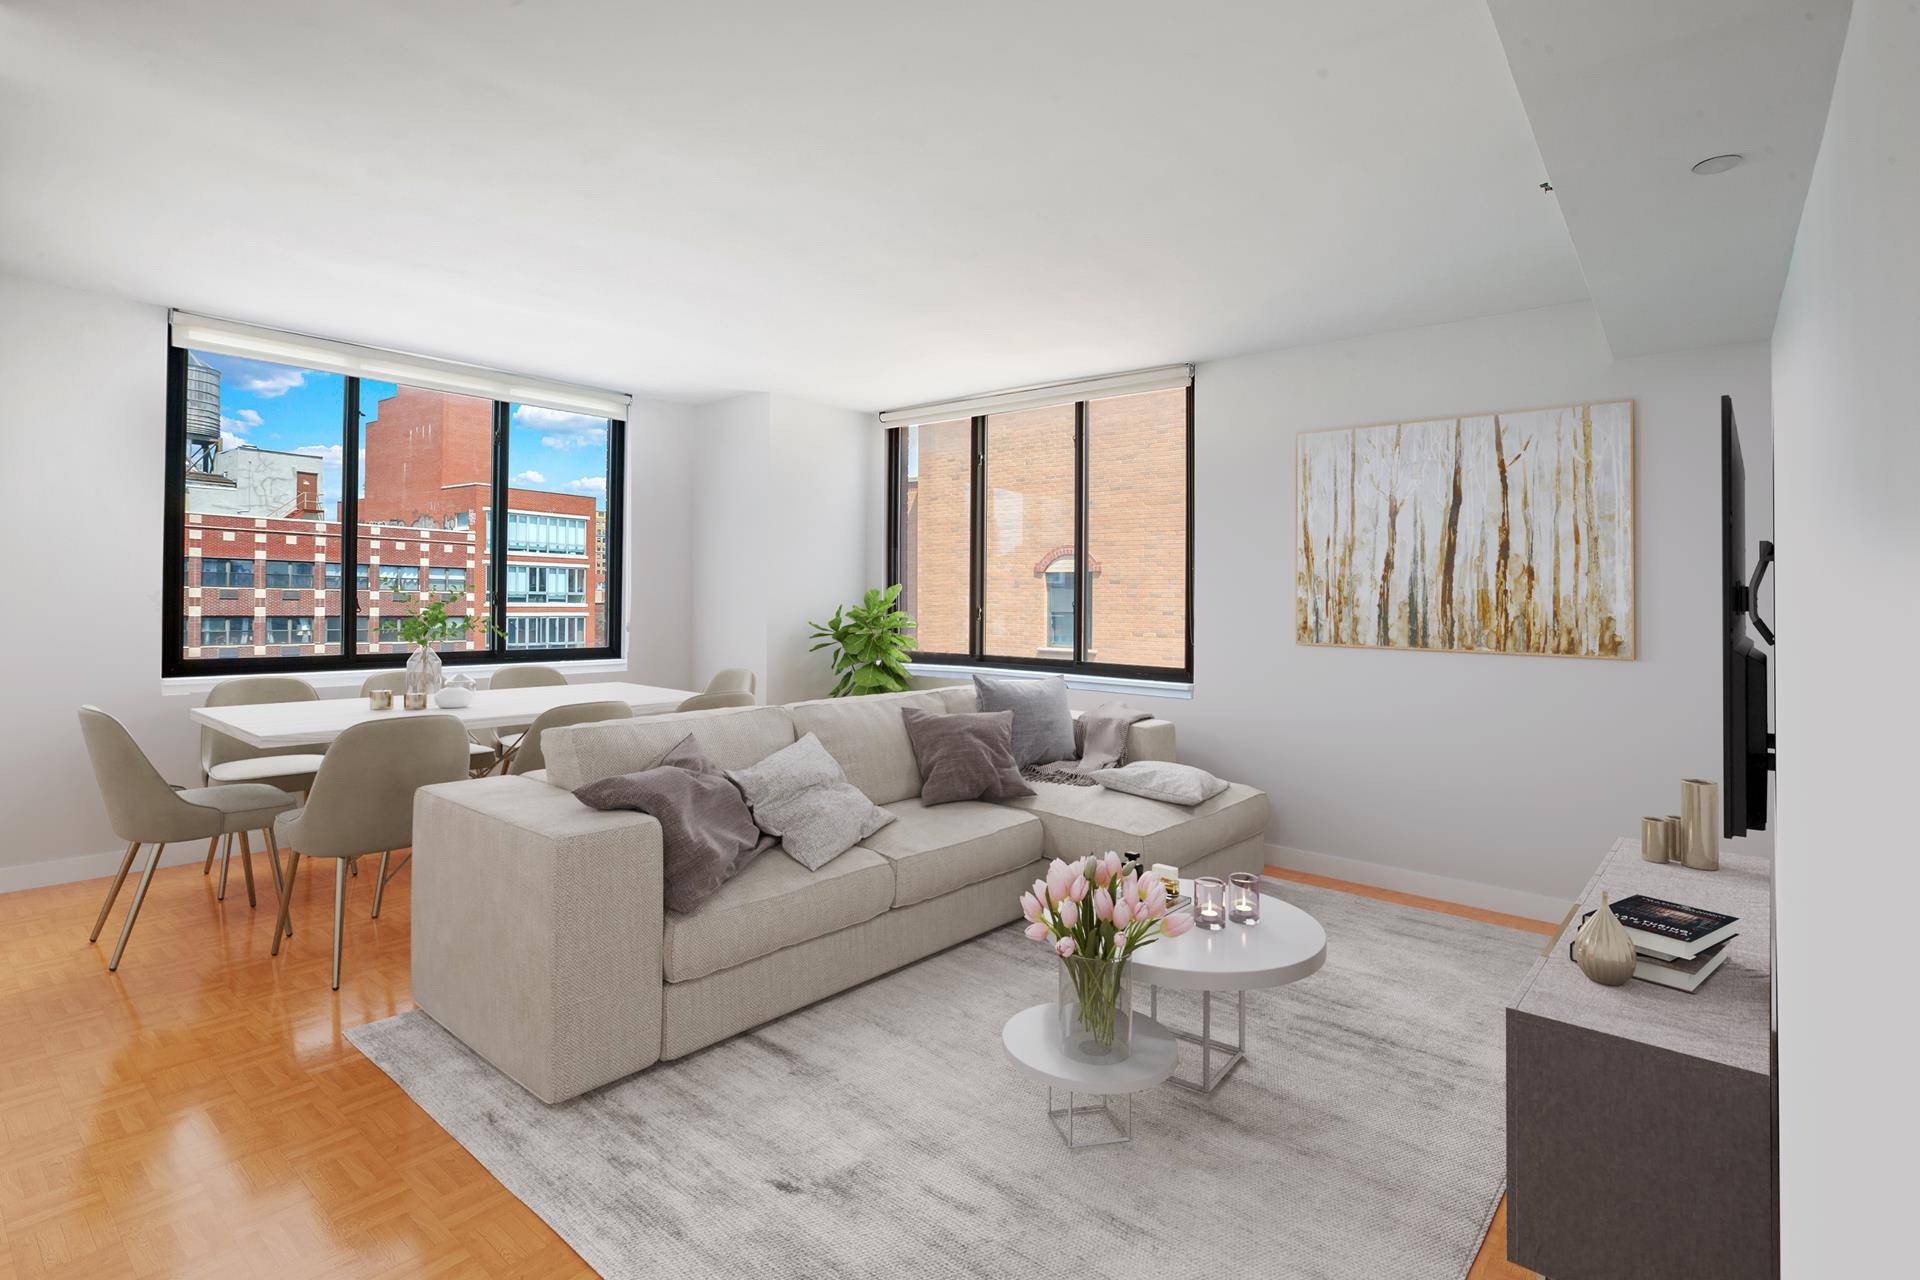 Welcome to 7A, a bright corner 2 bed 2 bath condominium located in the heart of Nolita, where Bowery meets Spring Street.